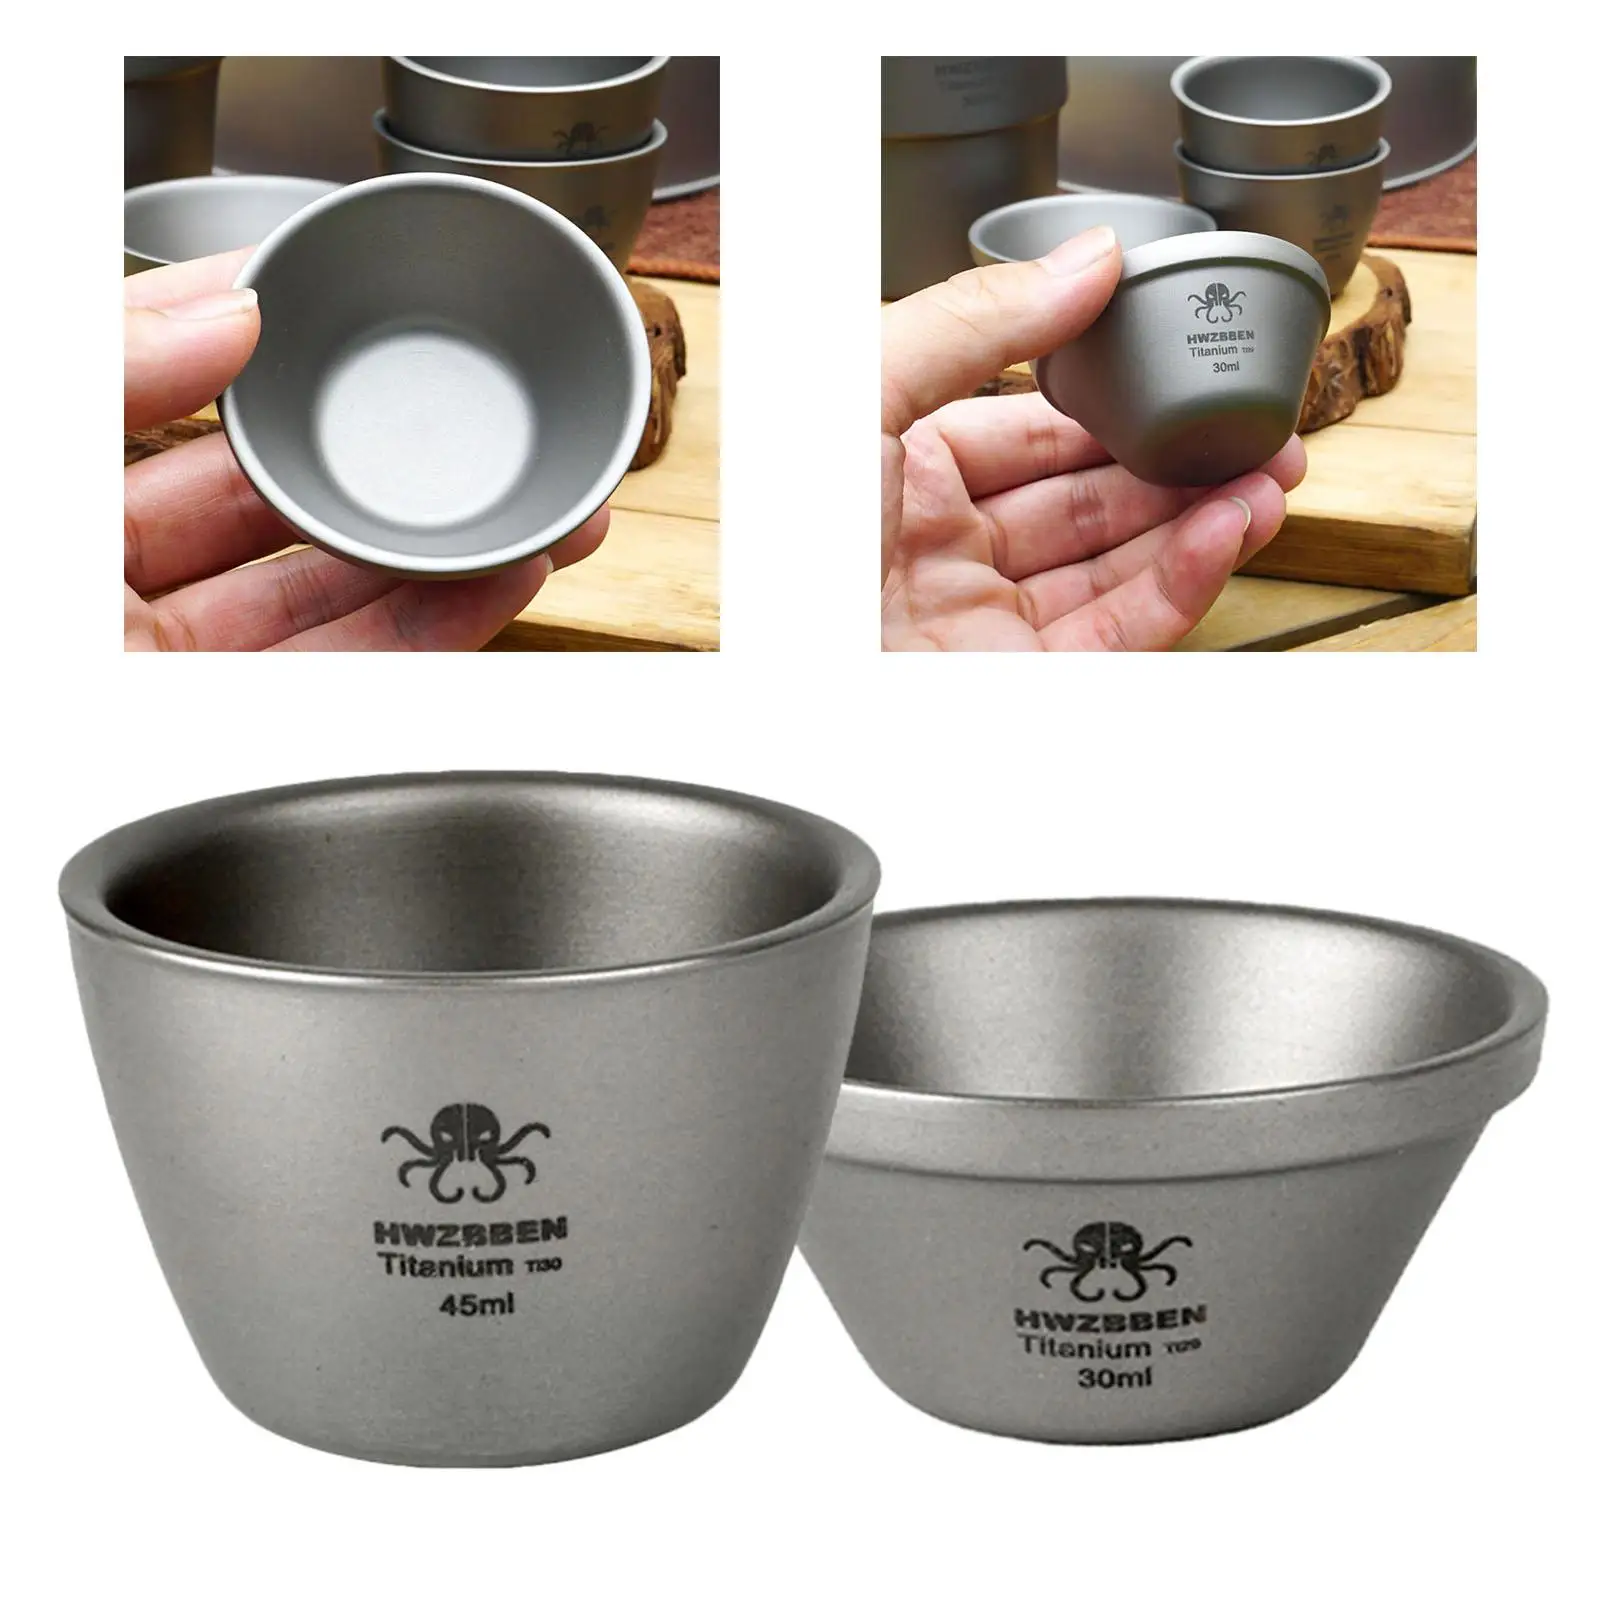 Mini Titanium Cup Double Wall Coffee Cups Cookware Titanium Tea Drink Cup Mug Beer Cup for Camping Office Travel Barbecue Party